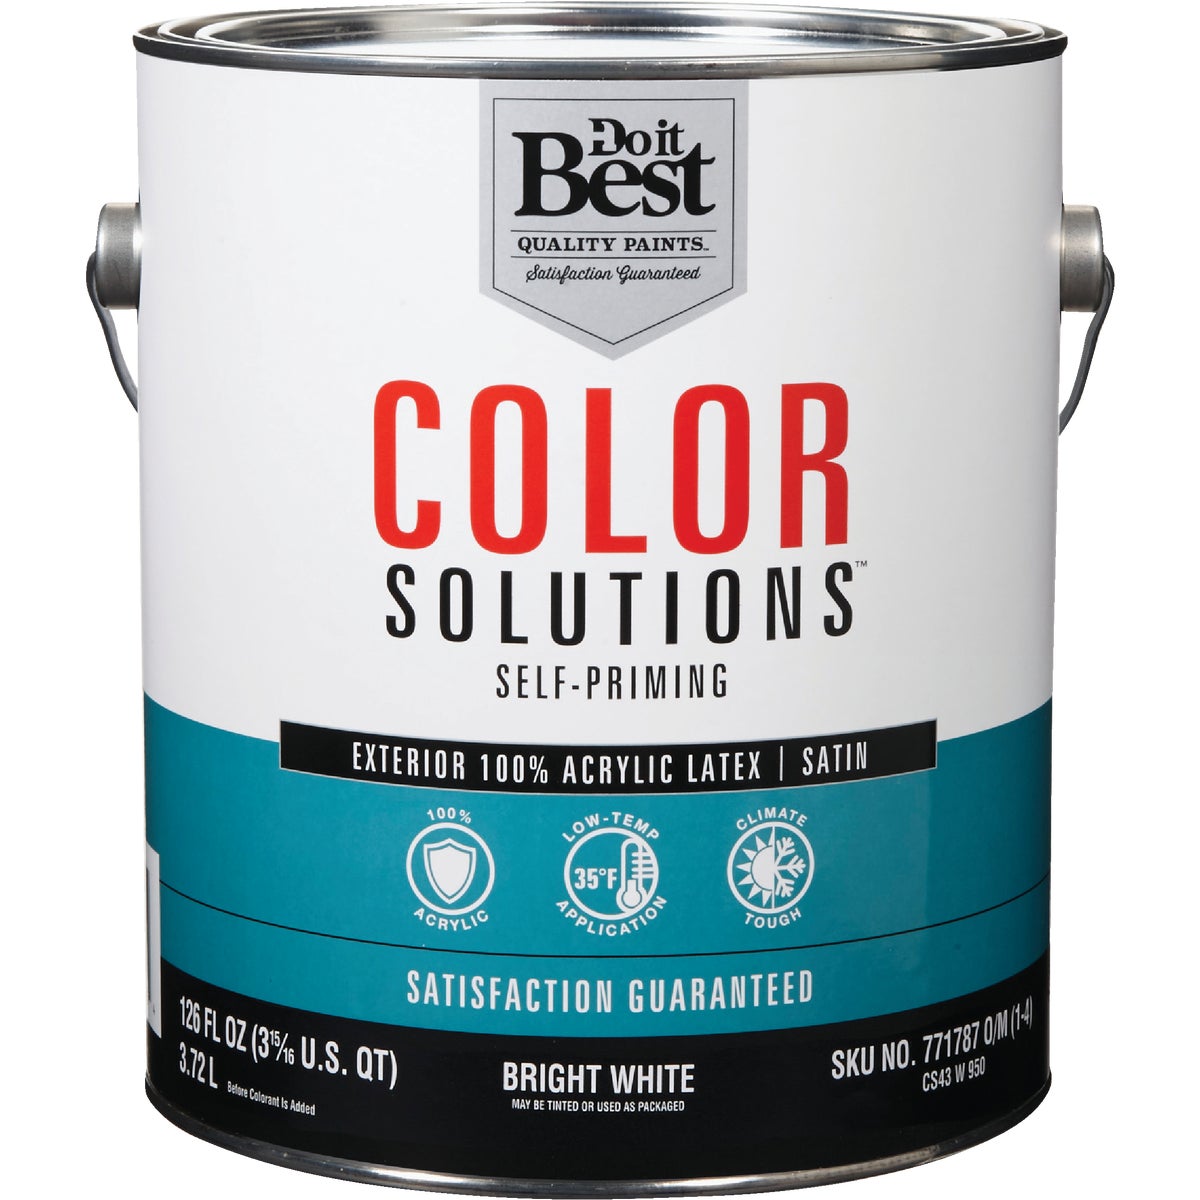 Item 771787, This paint is formulated with 100% acrylic resins for durability and color 